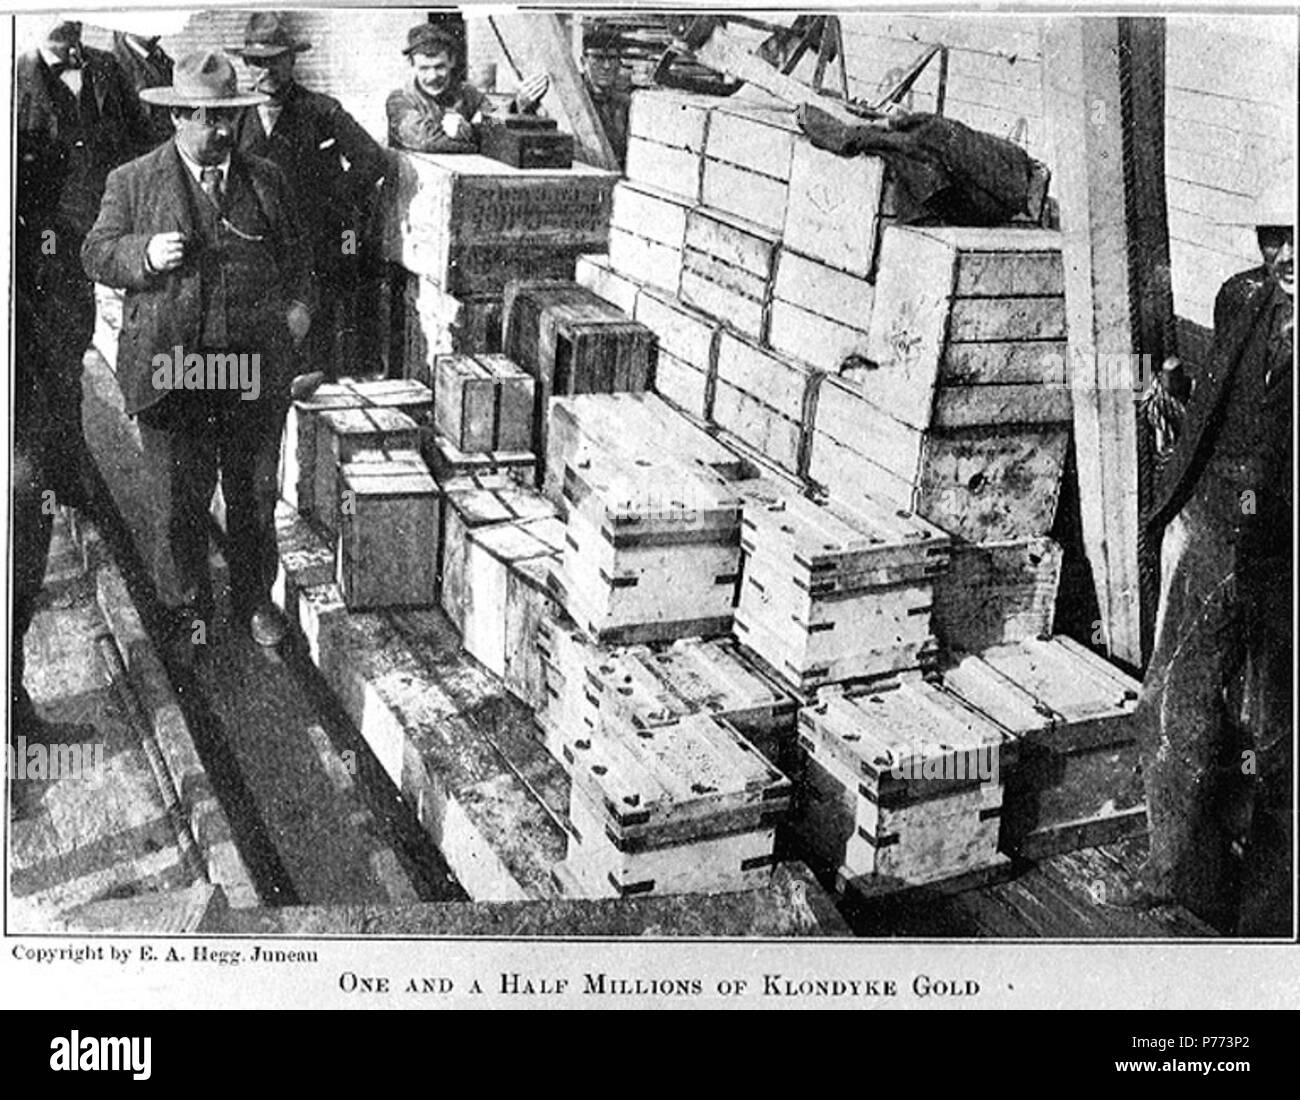 . English: Last shipment of gold for the year leaving Dawson, Yukon Territory, September 14, 1898. English: Caption on image: 'One and a half millions of Klondyke gold' Original image in Hegg Album 22, page 37 . Klondike Gold Rush Subjects (LCTGM): Gold--Yukon--Dawson; Shipping--Yukon--Dawson Subjects (LCSH): Yukon--Gold discoveries  . 14 September 1898 7 Last shipment of gold for the year leaving Dawson, Yukon Territory, September 14, 1898 (HEGG 607) Stock Photo